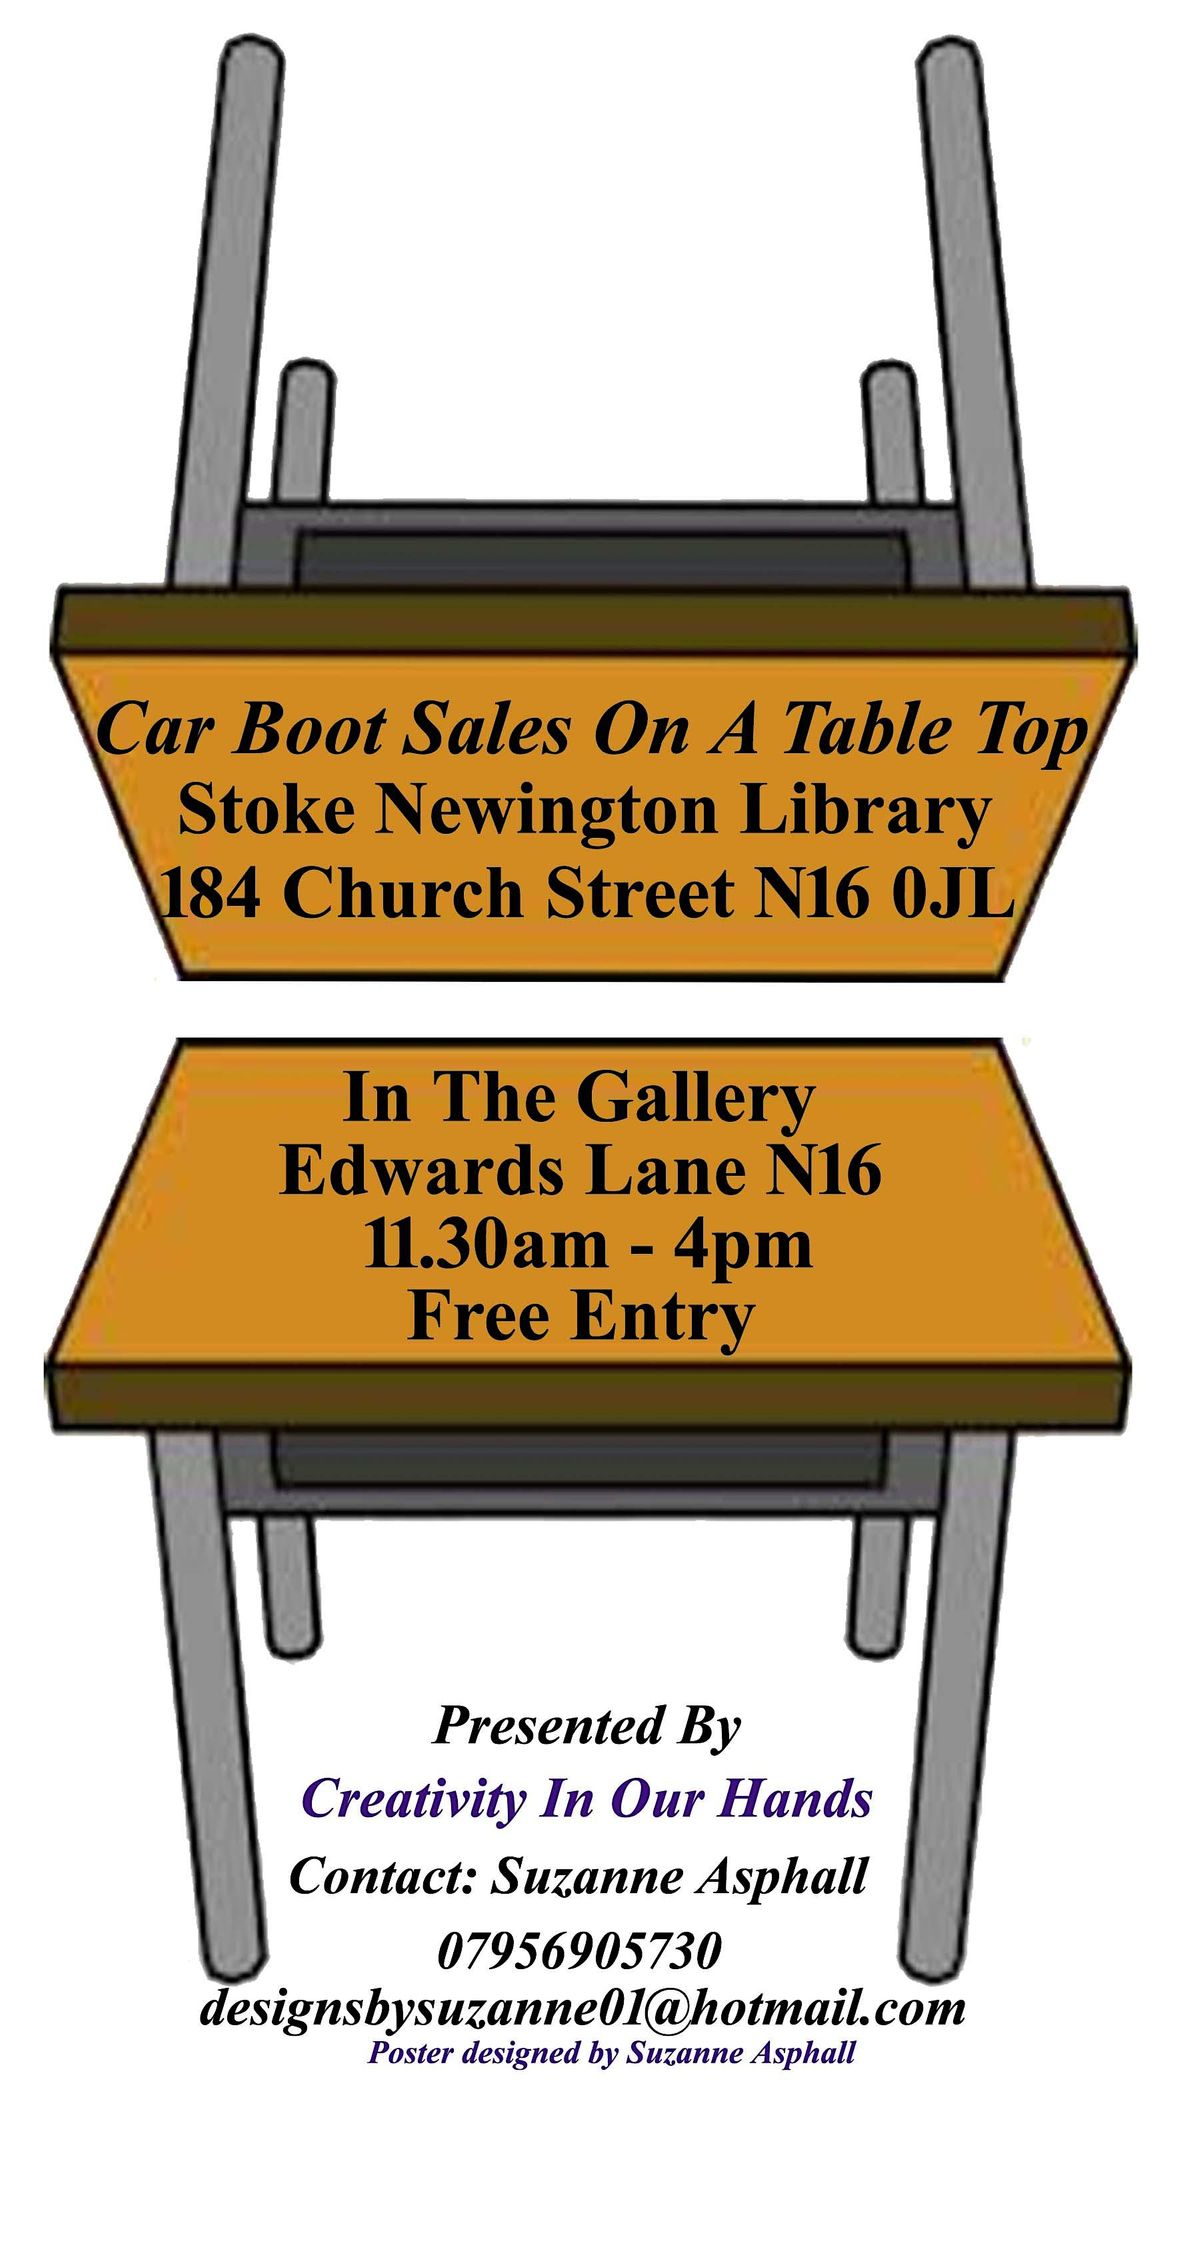 Car boot sales on a table top